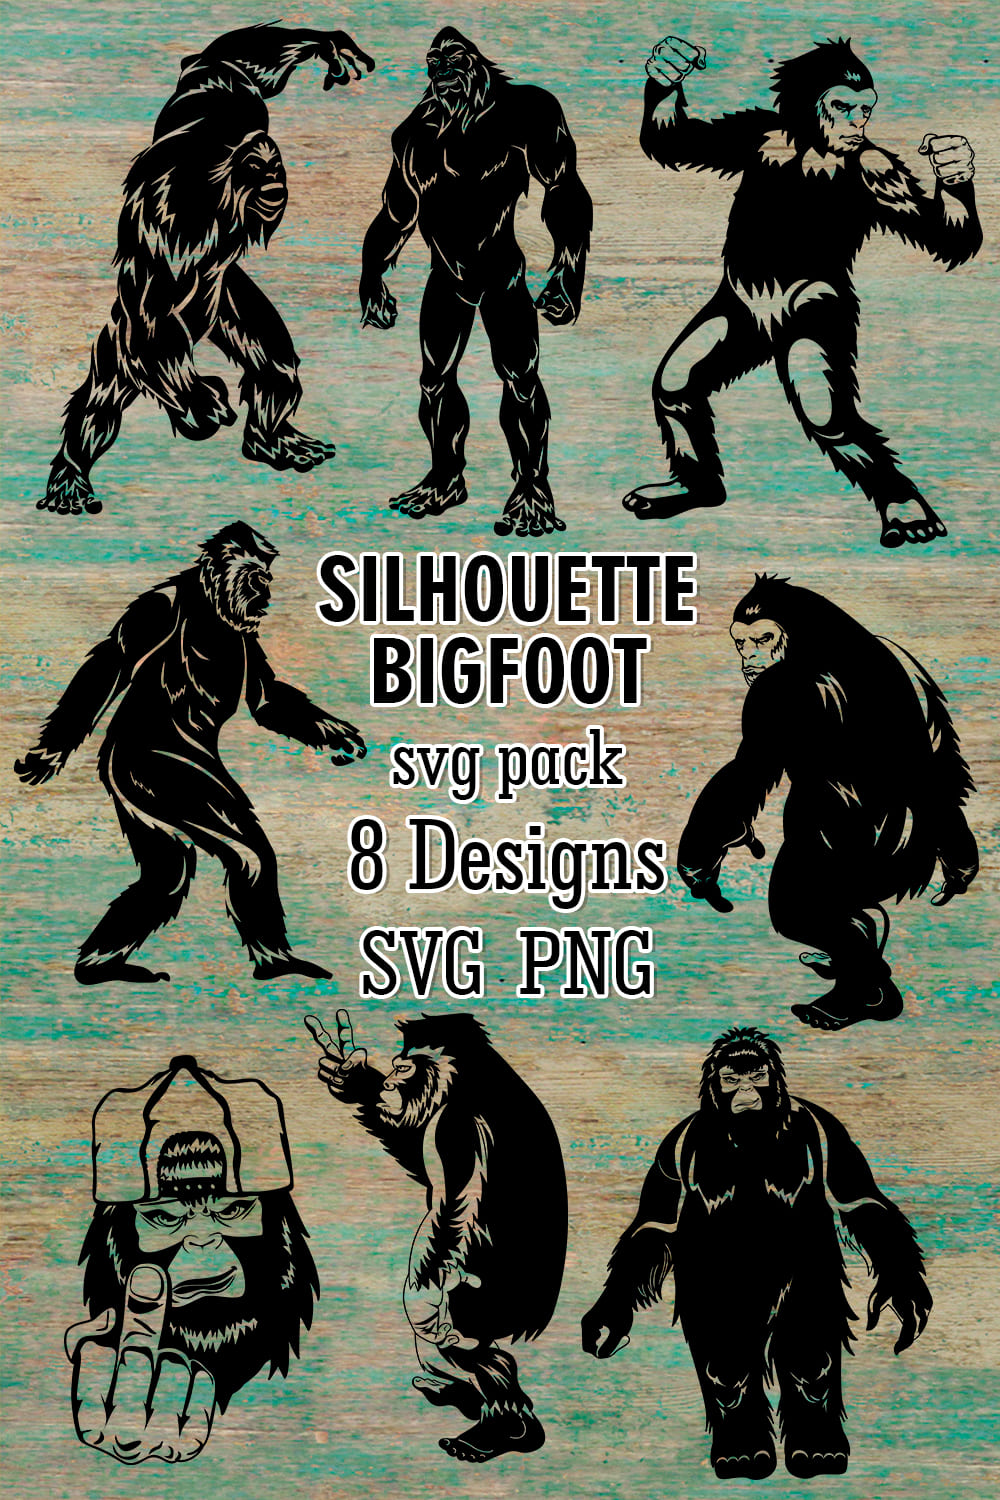 Silhouette Bigfoot SVG pinterest image preview.